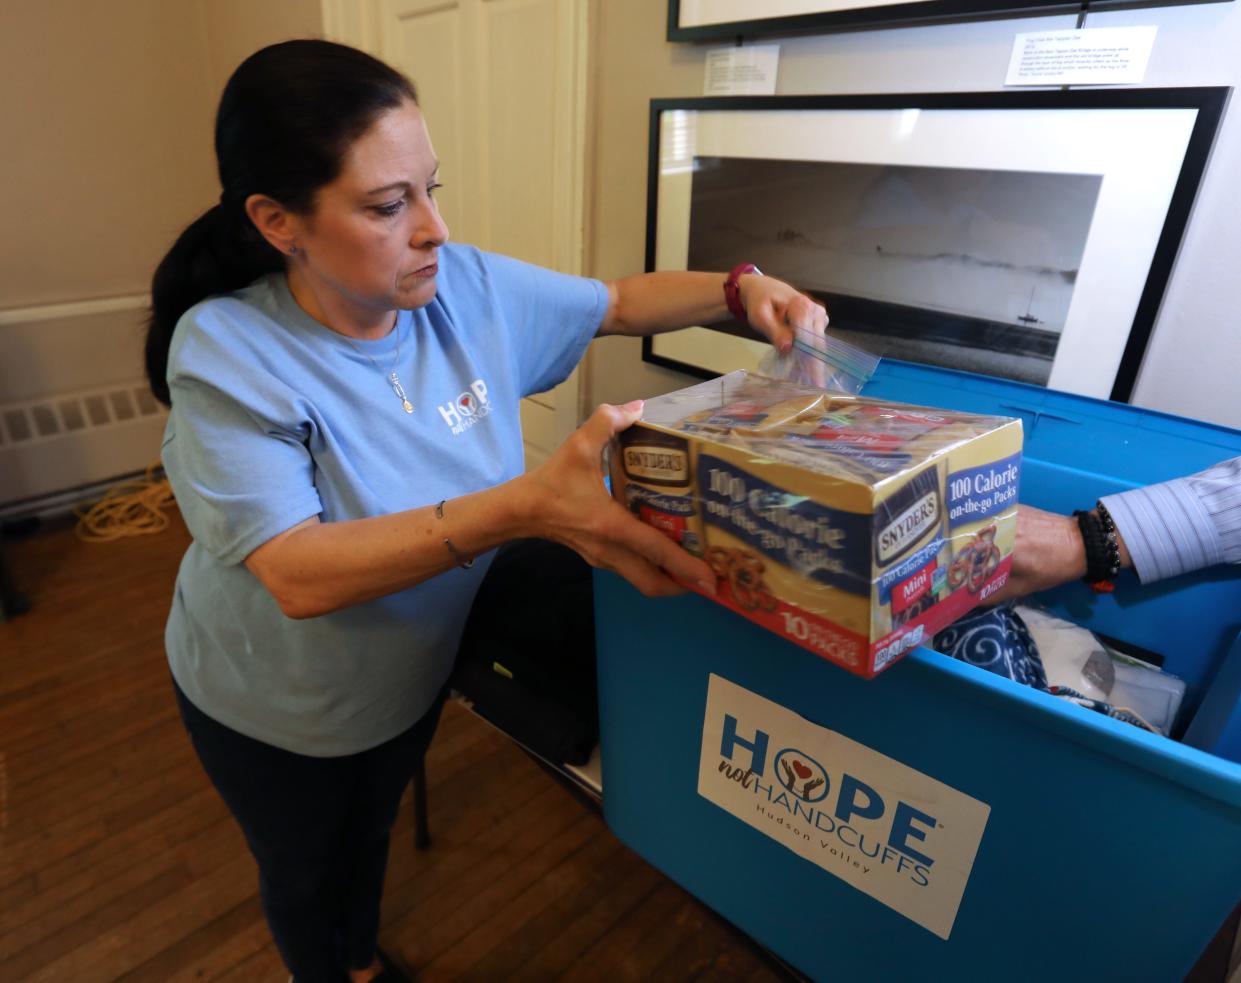 Cathy Kennedy of Congers shows supplies used in the "Hope Not Handcuffs" program that trains police departments to help people seeking opioid addiction treatment May 1, 2019. She is an "angel" volunteer with the program.